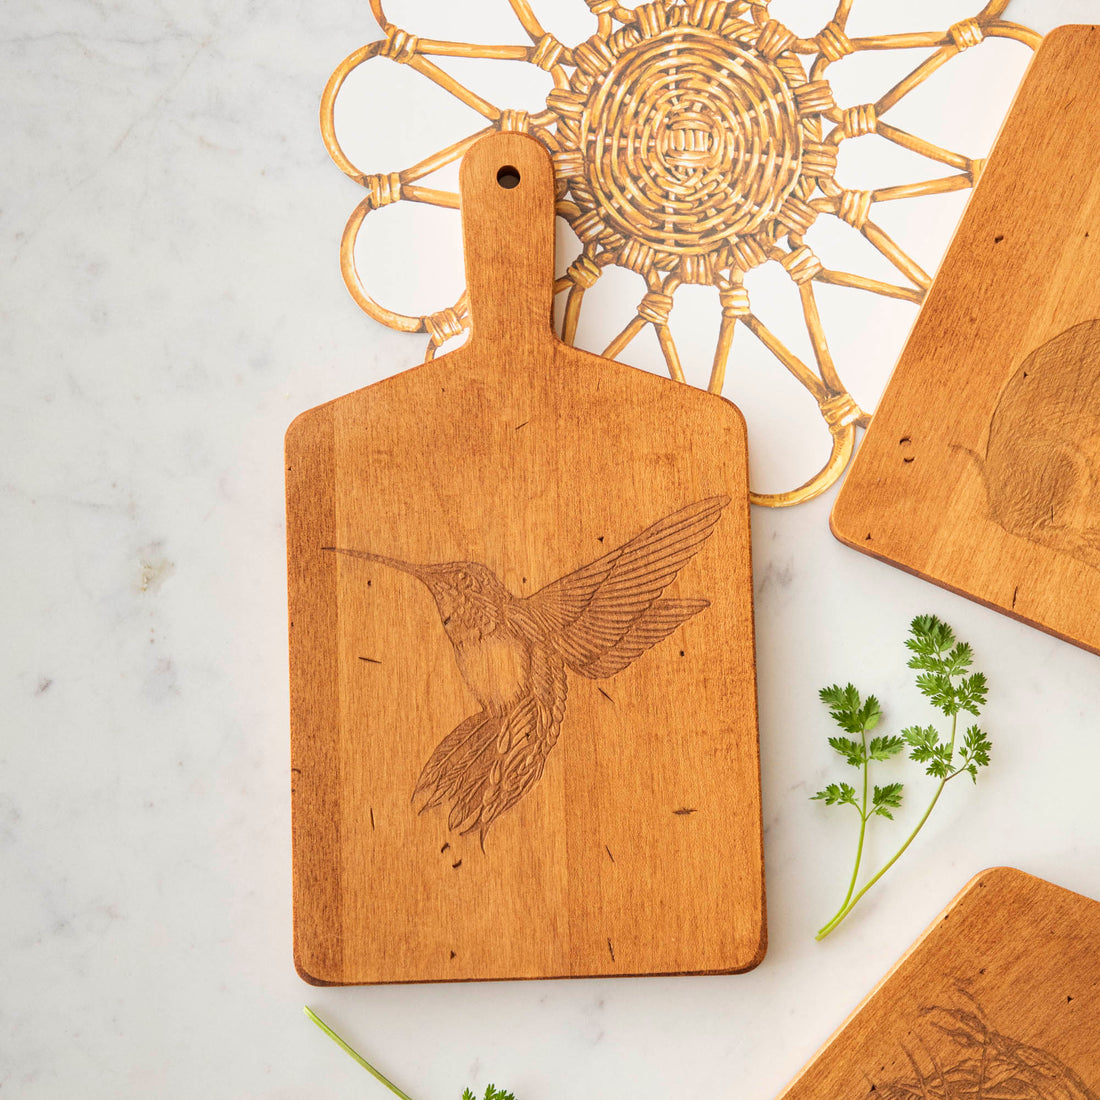 Artisanal Hummingbird Artisan Maple Rectangle Cheese Board with an etched hummingbird design on a marble countertop beside decorative items and herbs by JK Adams.